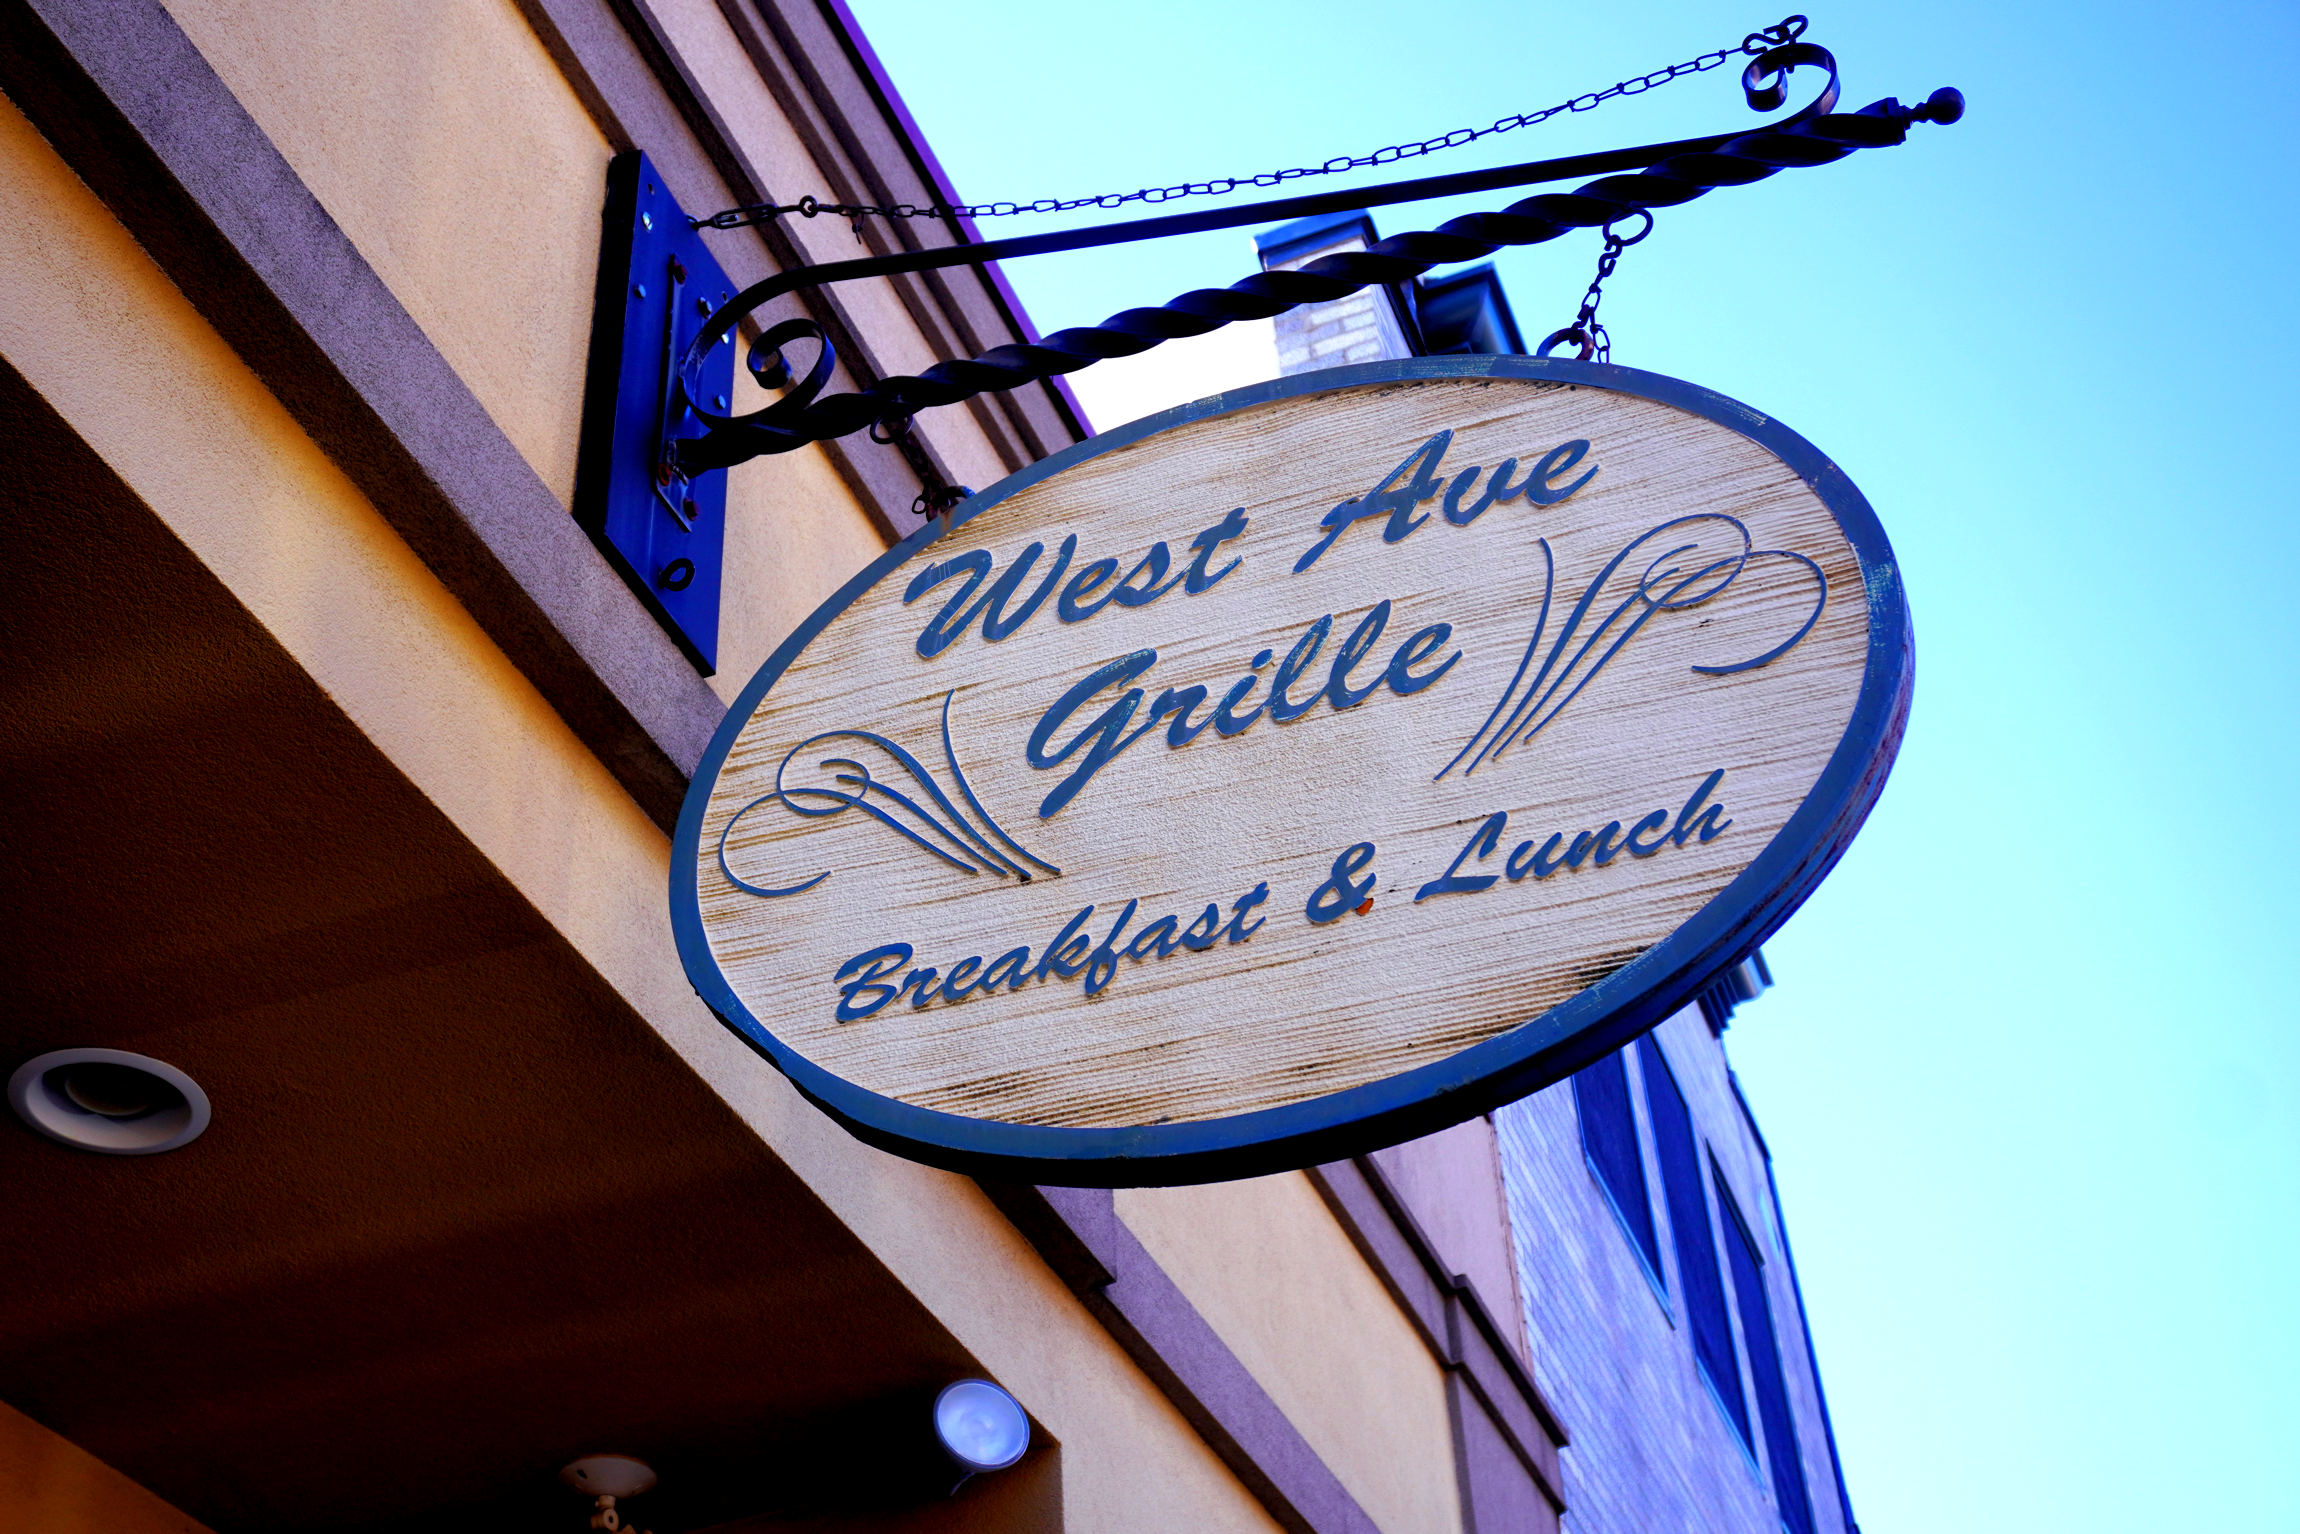 West Ave Grill Signage